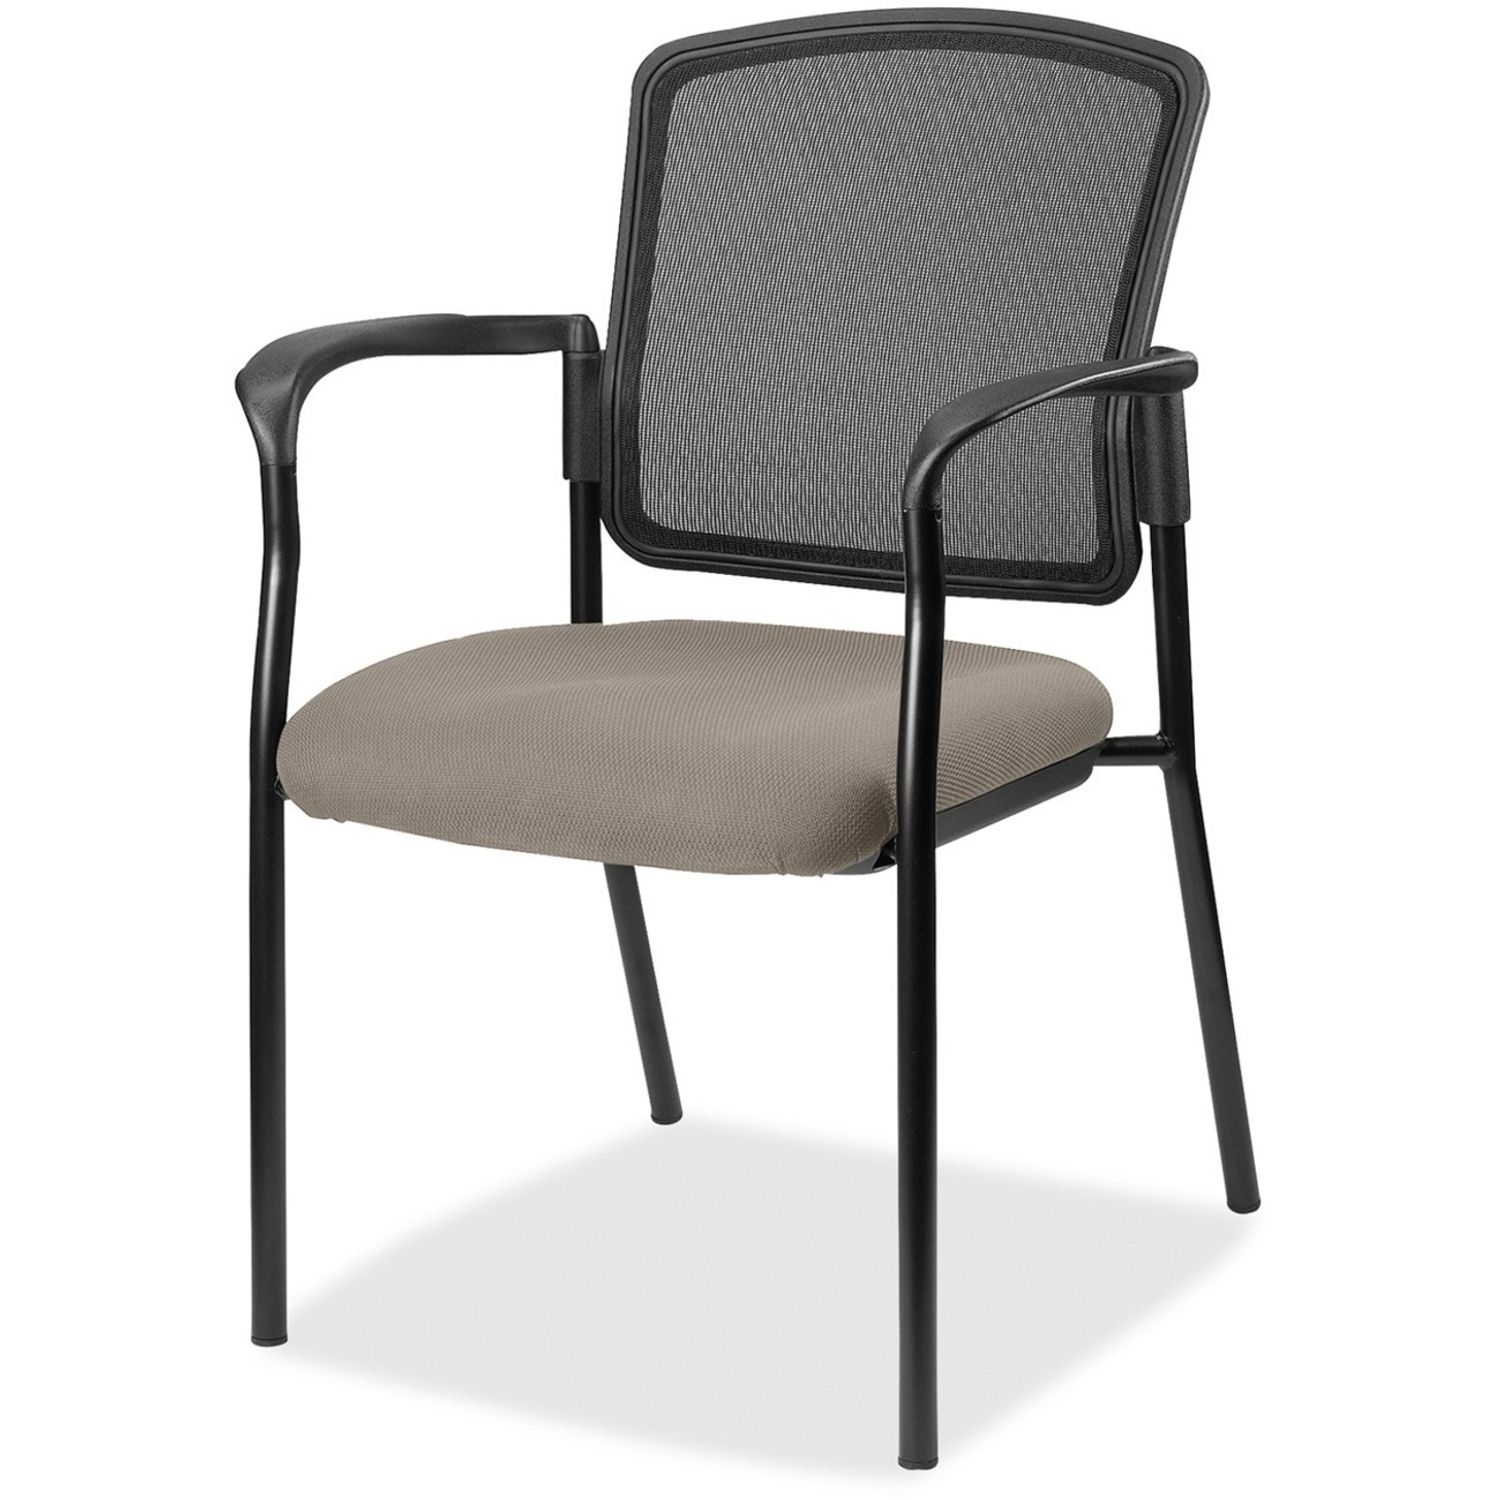 Guest Meshback/Black Frame Chair, Insight Fossill Seat, Black Frame, 1 Each